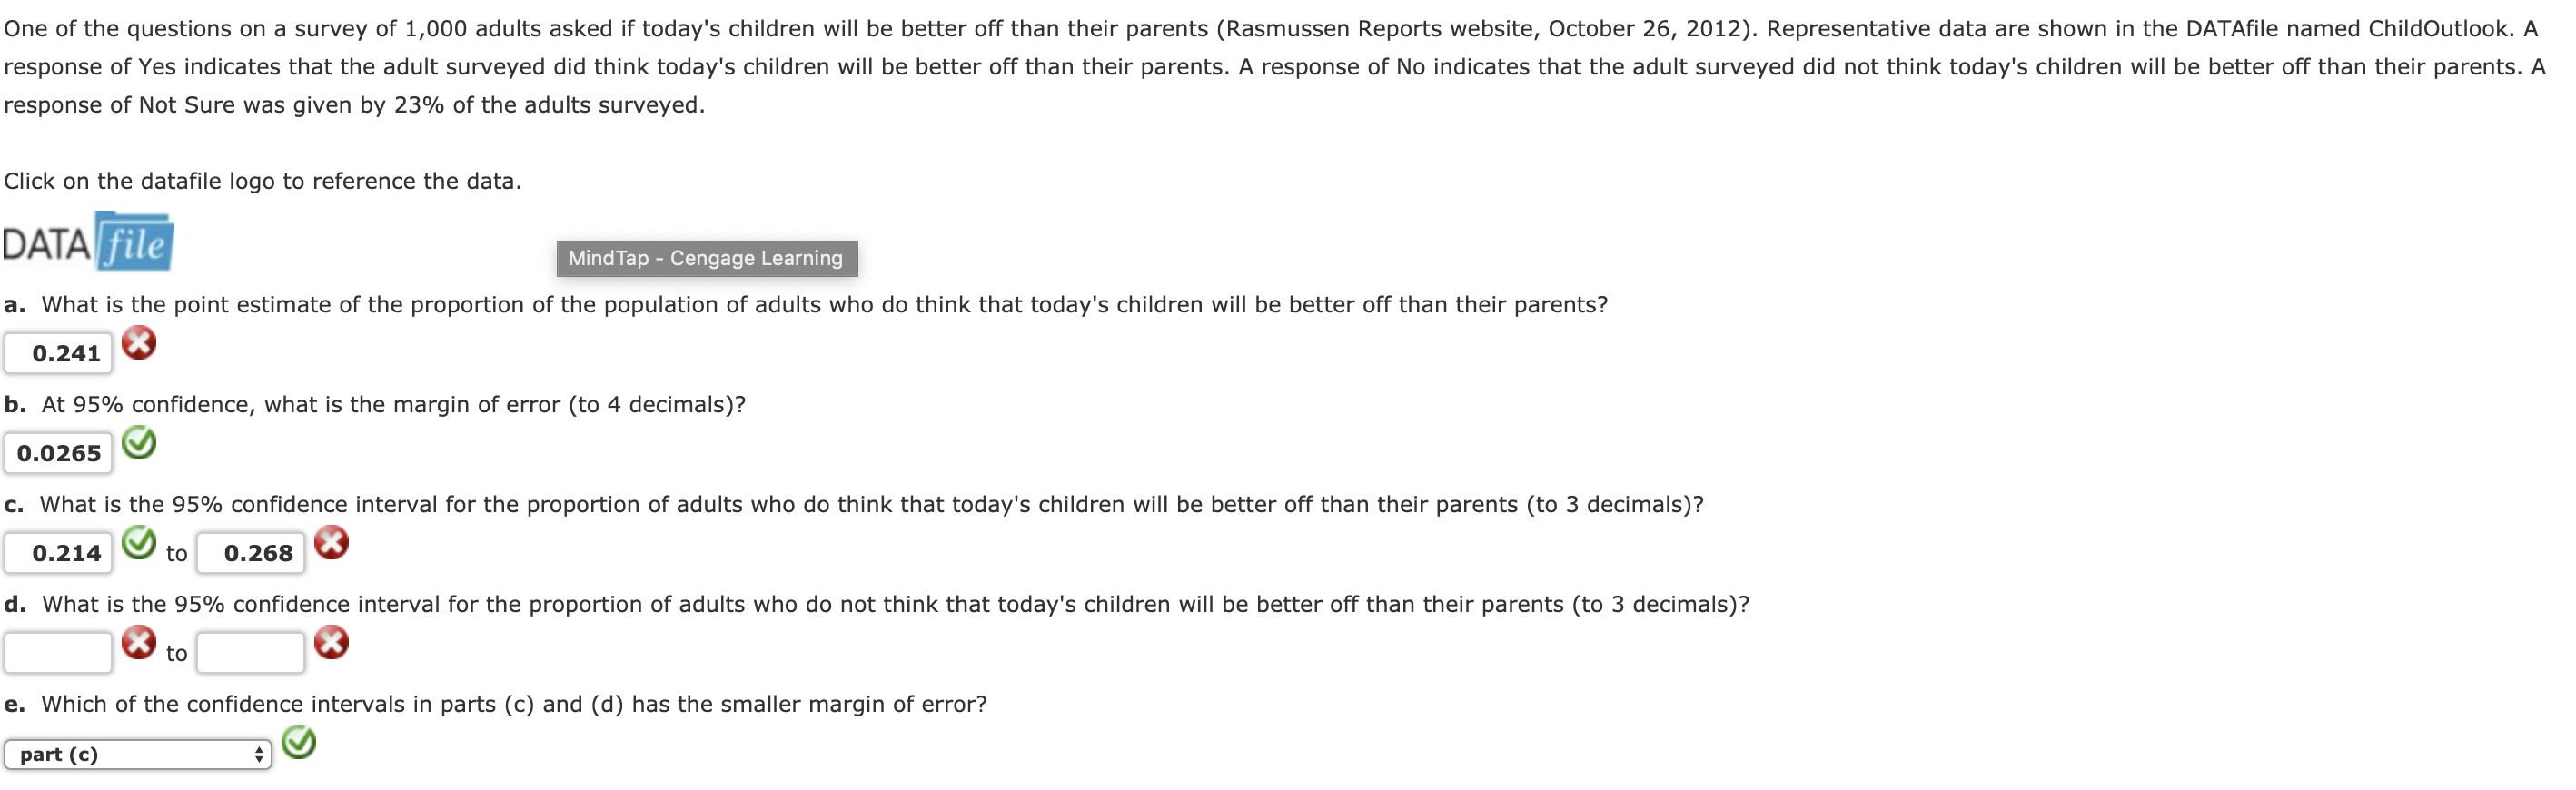 One of the questions on a survey of 1,000 adults asked if today's children will be better off than their parents (Rasmussen Reports website, October 26, 2012). Representative data are shown in the DATAfile named ChildOutlook. A
response of Yes indicates that the adult surveyed did think today's children will be better off than their parents. A response of No indicates that the adult surveyed did not think today's children will be better off than their parents. A
response of Not sure was given by 23% of the adults surveyed.
Click on the datafile logo to reference the data
DATA file
MindTap - Cengage Learning
a. What is the point estimate of the proportion of the population of adults who do think that today's children will be better off than their parents?
0.241
b. At 95% confidence, what is the margin of error (to 4 decimals)?
0.0265
c what is the 95% confidence interval for the proportion of adults who do think that today's children will be better off than their parents to 3 decimals ?
0.214to 0.268
d, what is the 95% confidence interval for the proportion of adults who do not think that today's children will be better off than their parents(to 3 decimals)?
to
e. Which of the confidence intervals in parts (c) and (d) has the smaller margin of error?
part (c)
